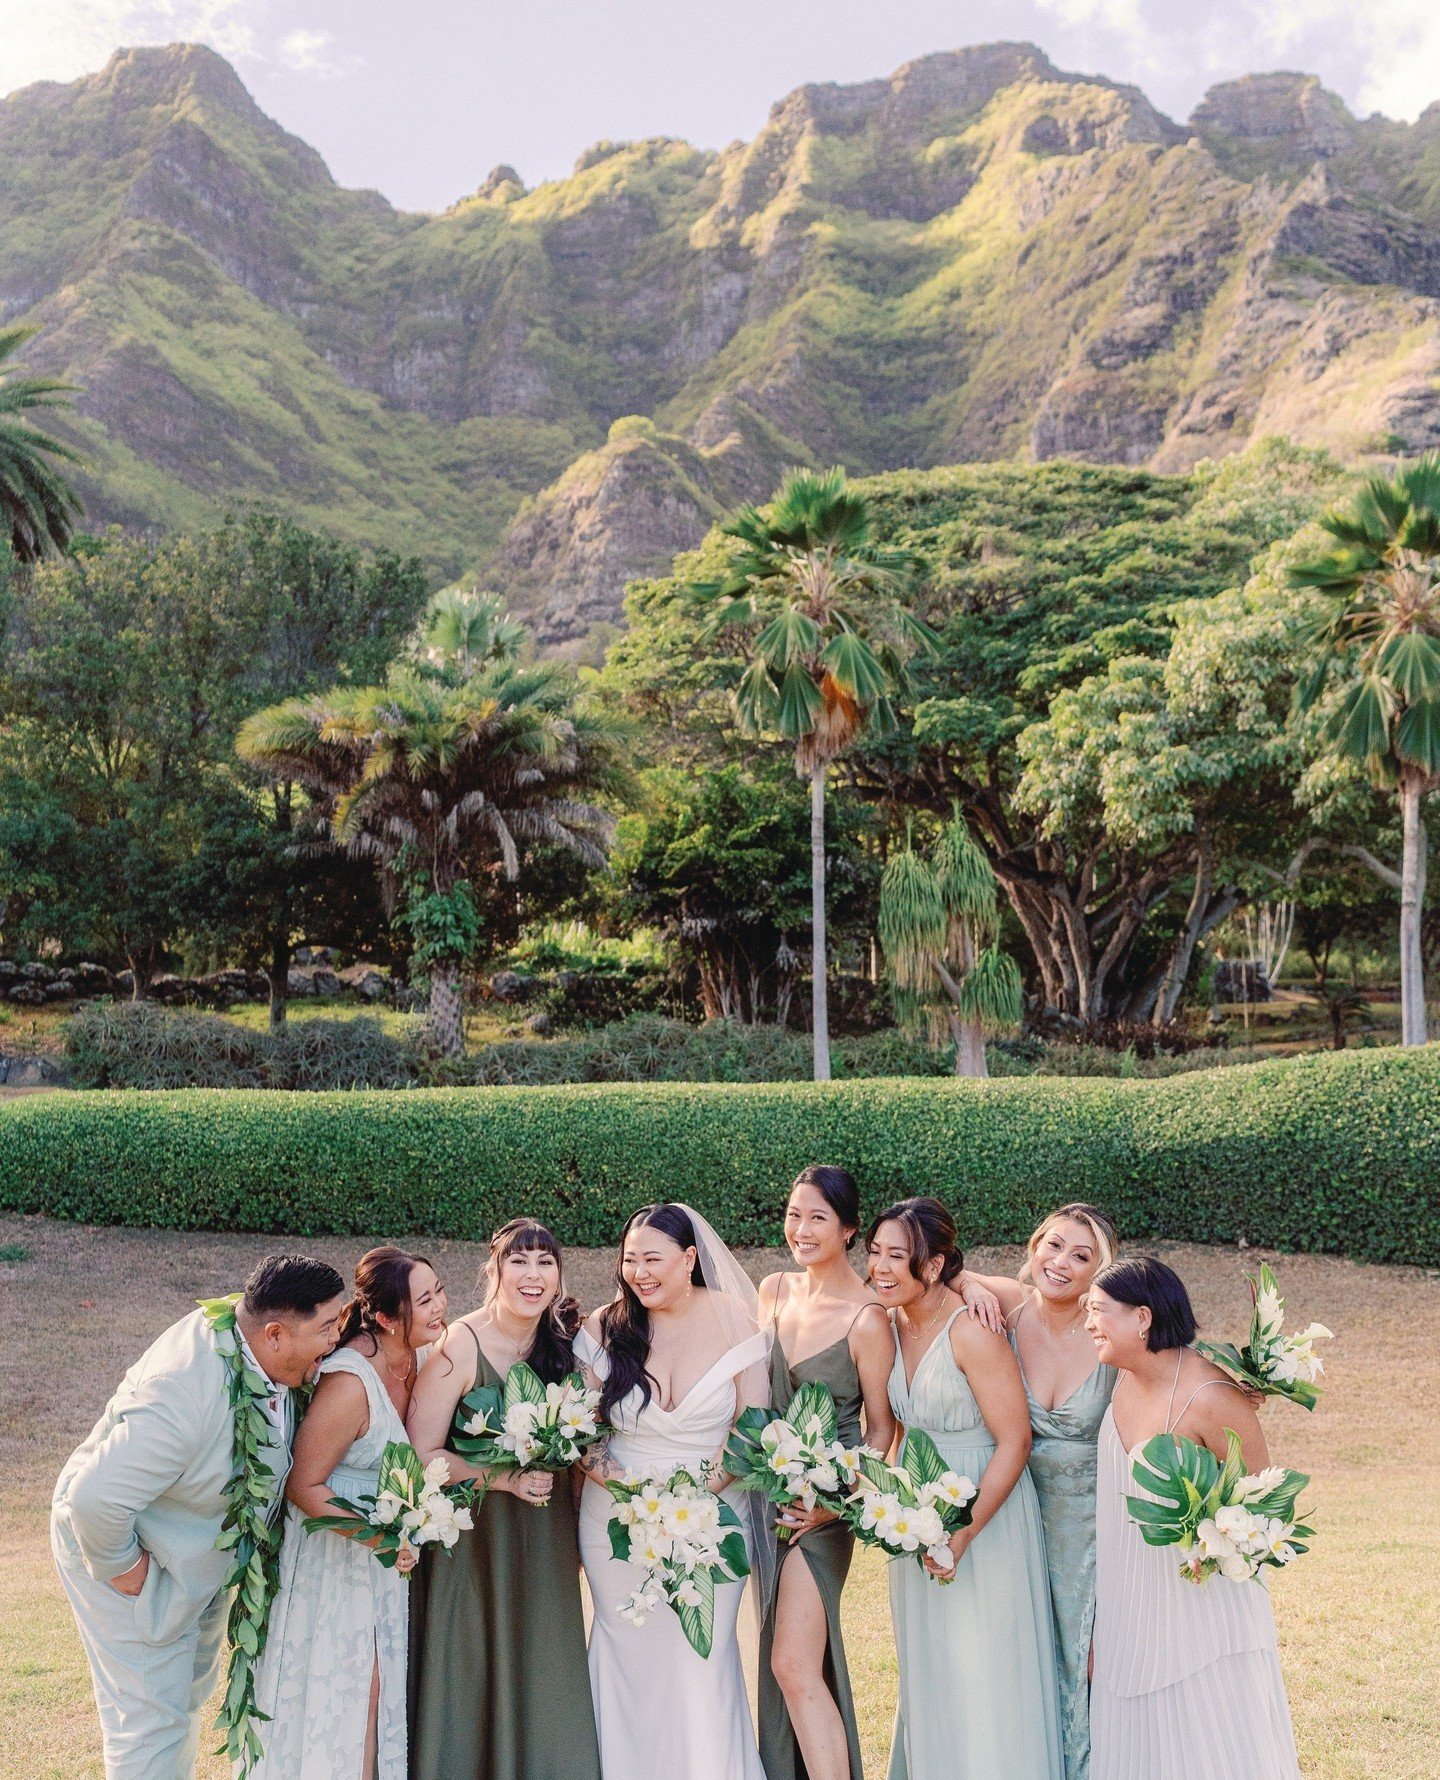 These Paliku mountains never disappoint! 😍⁠ The B+G initially gravitated towards a green and white color palette, but opted to also incorporate the beautiful colors of Hawai'i. To get the best of both worlds, the wedding party color palette leaned i